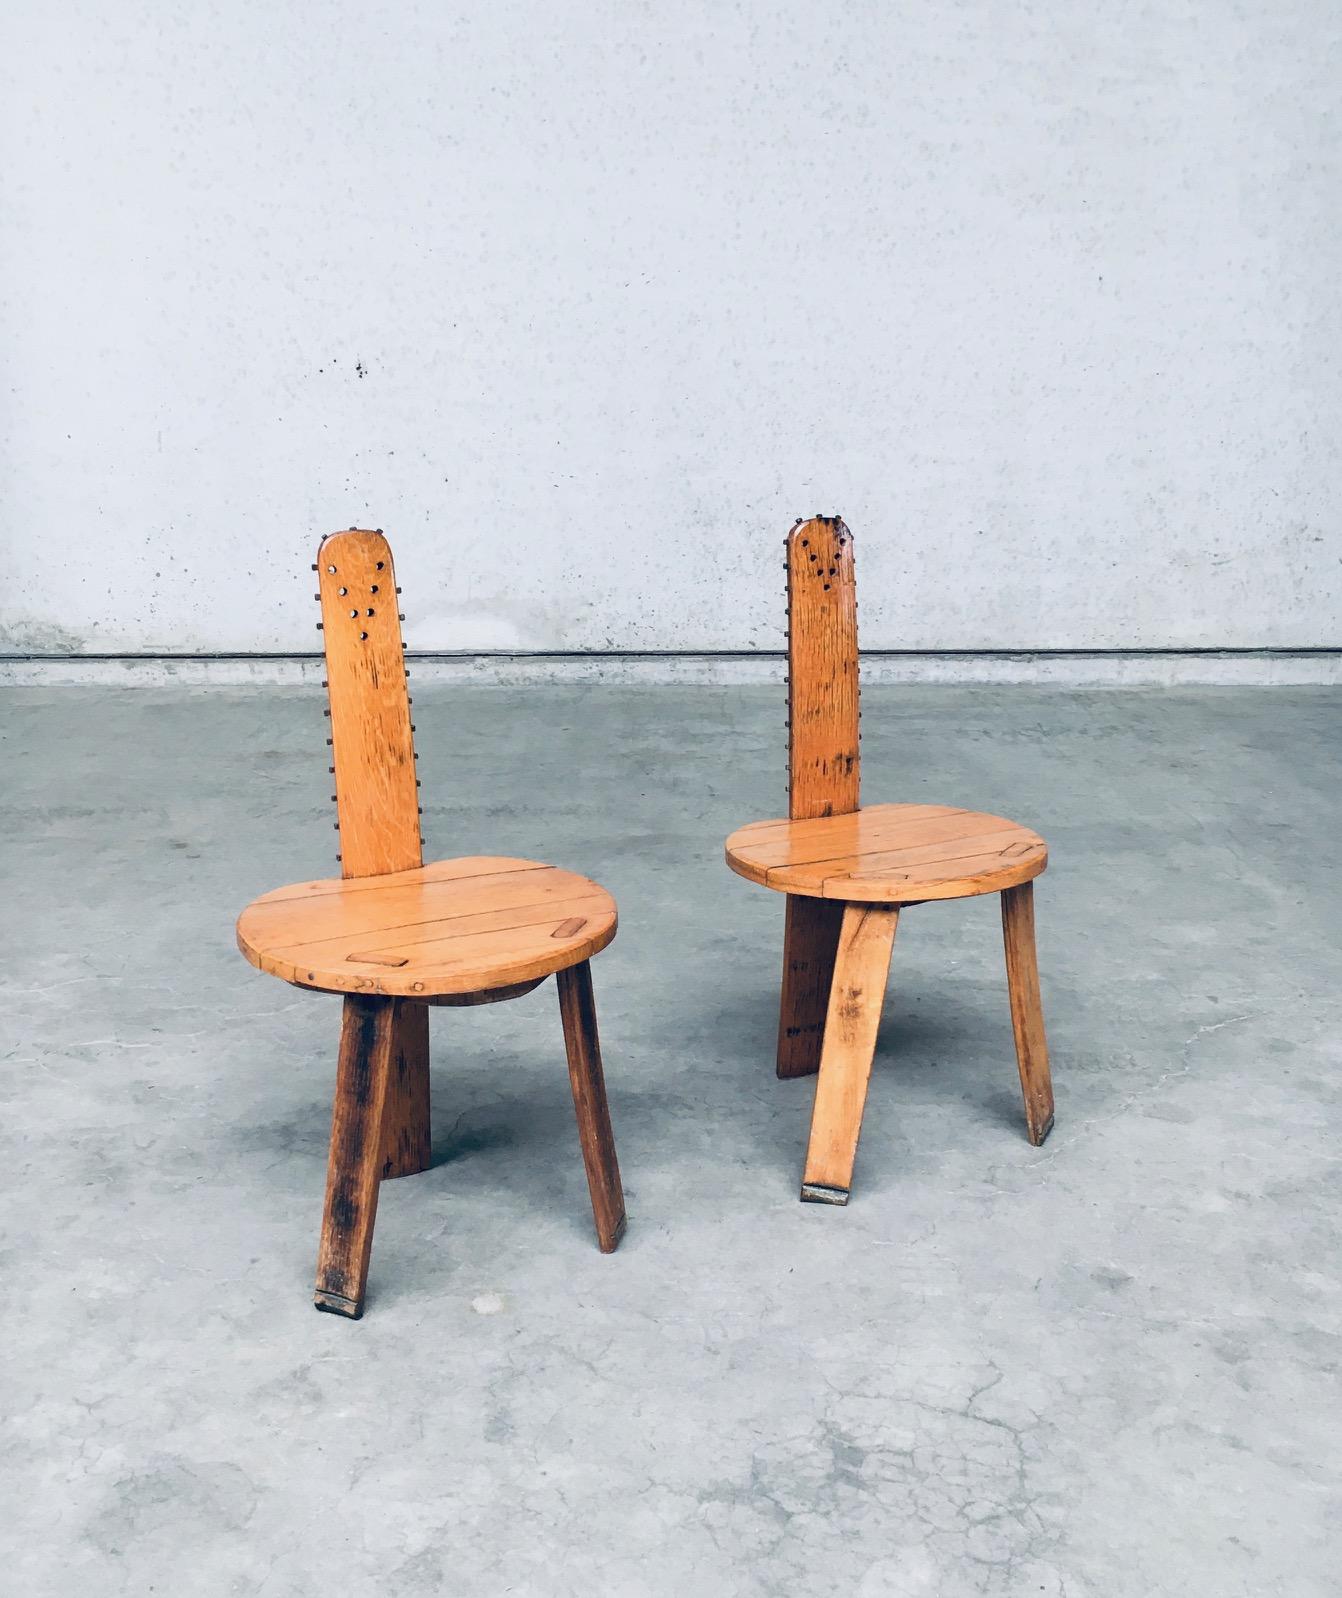 Vintage French Folk Art Brutalist Design SAW Back Side Chair set of 2. Made in France, 1960's period. Light oak constructed chairs with Saw model back which has square nails all surrounding and holes in a triangular shape at the top of the backrest.